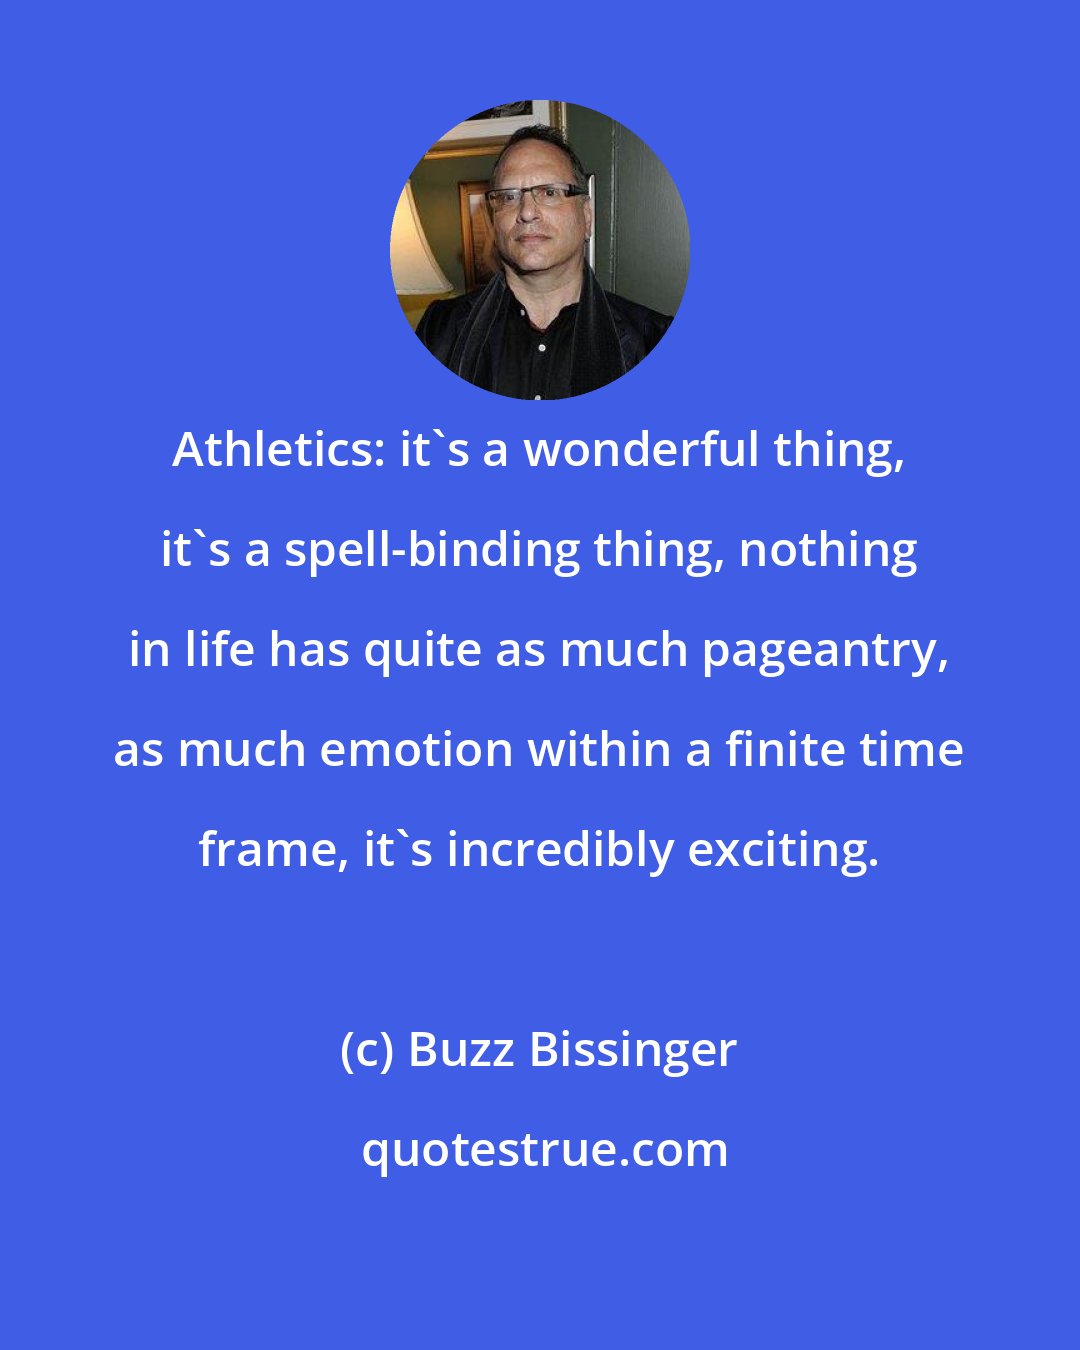 Buzz Bissinger: Athletics: it's a wonderful thing, it's a spell-binding thing, nothing in life has quite as much pageantry, as much emotion within a finite time frame, it's incredibly exciting.